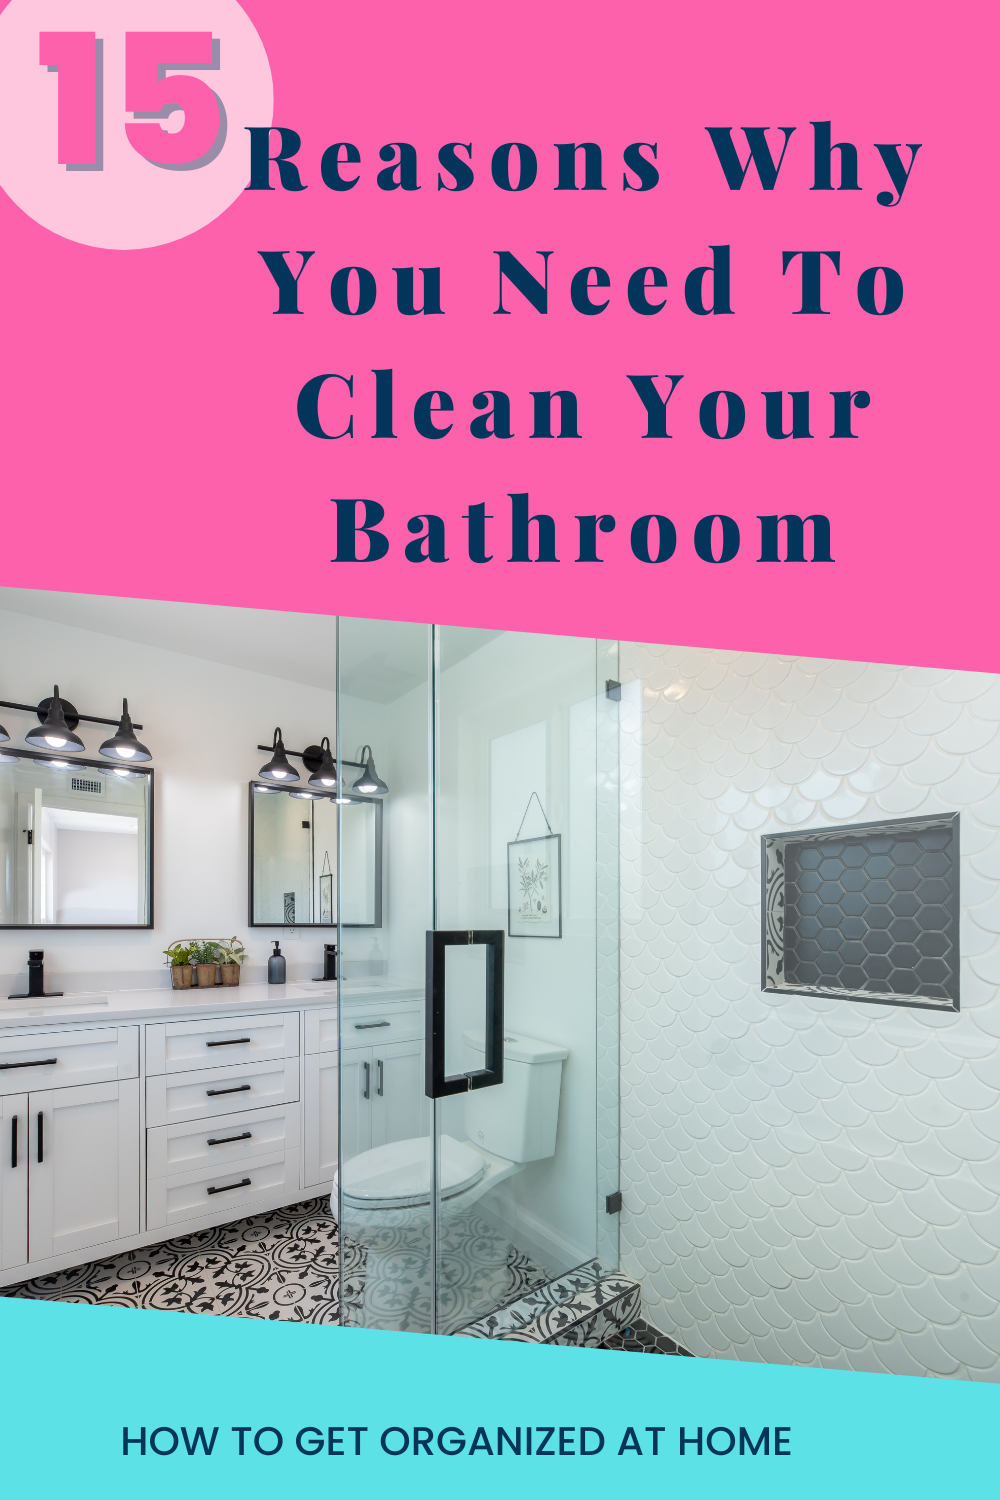 6 Reasons Why Shower Deep Cleaning is Important